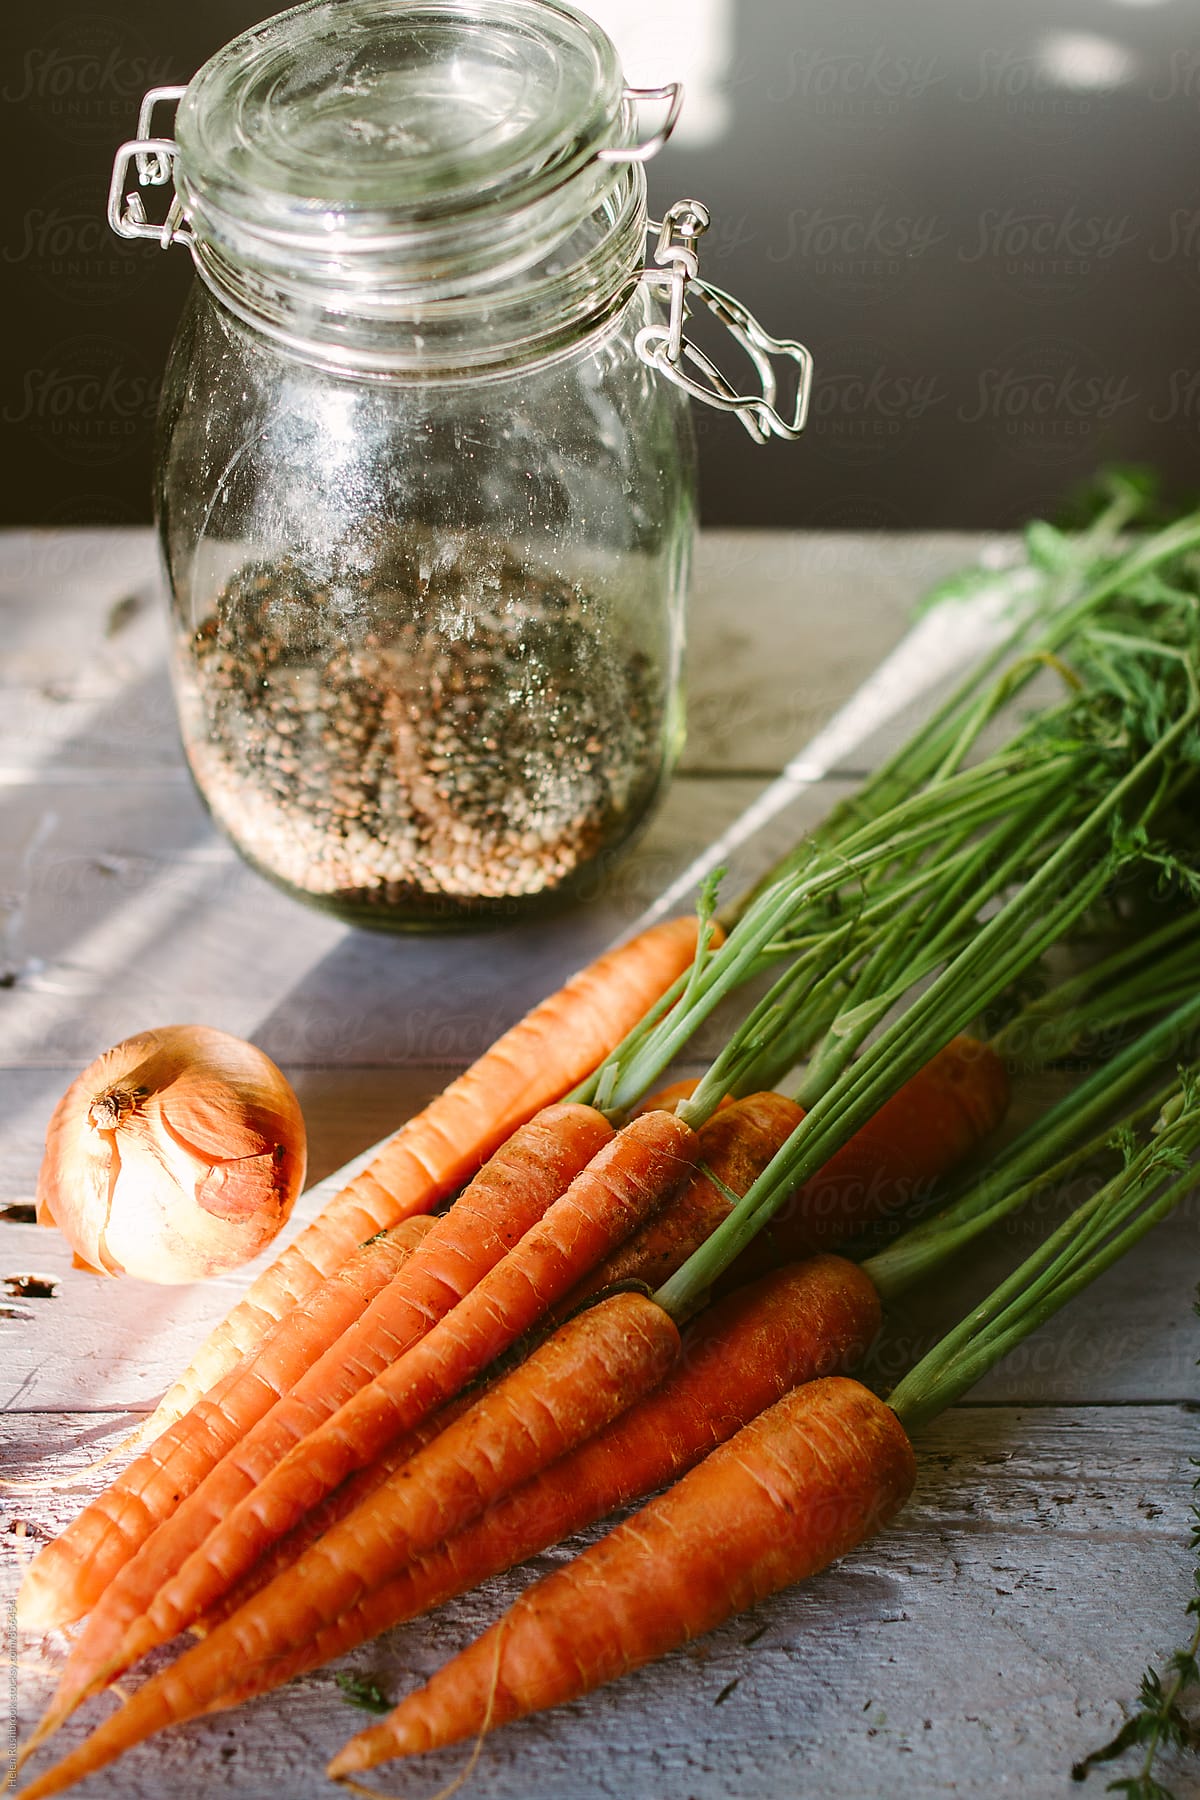 Carrots, onions and lentils.